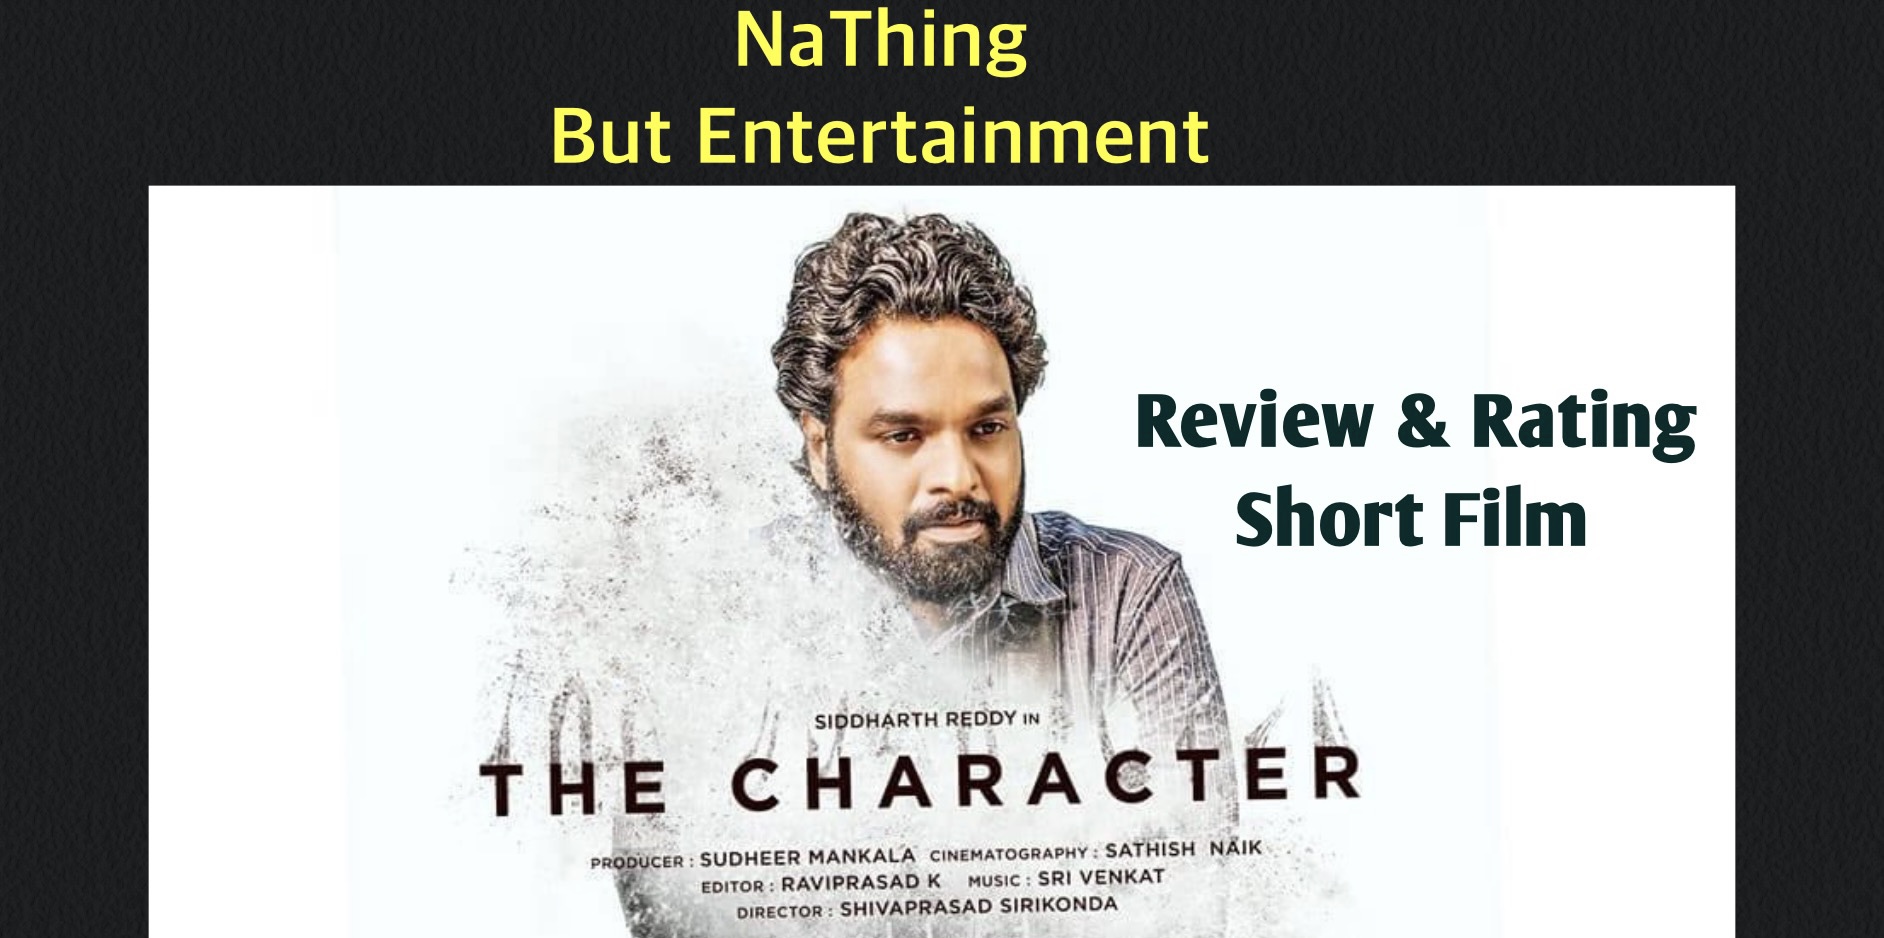 The-character-short-film-review-NaThing-website